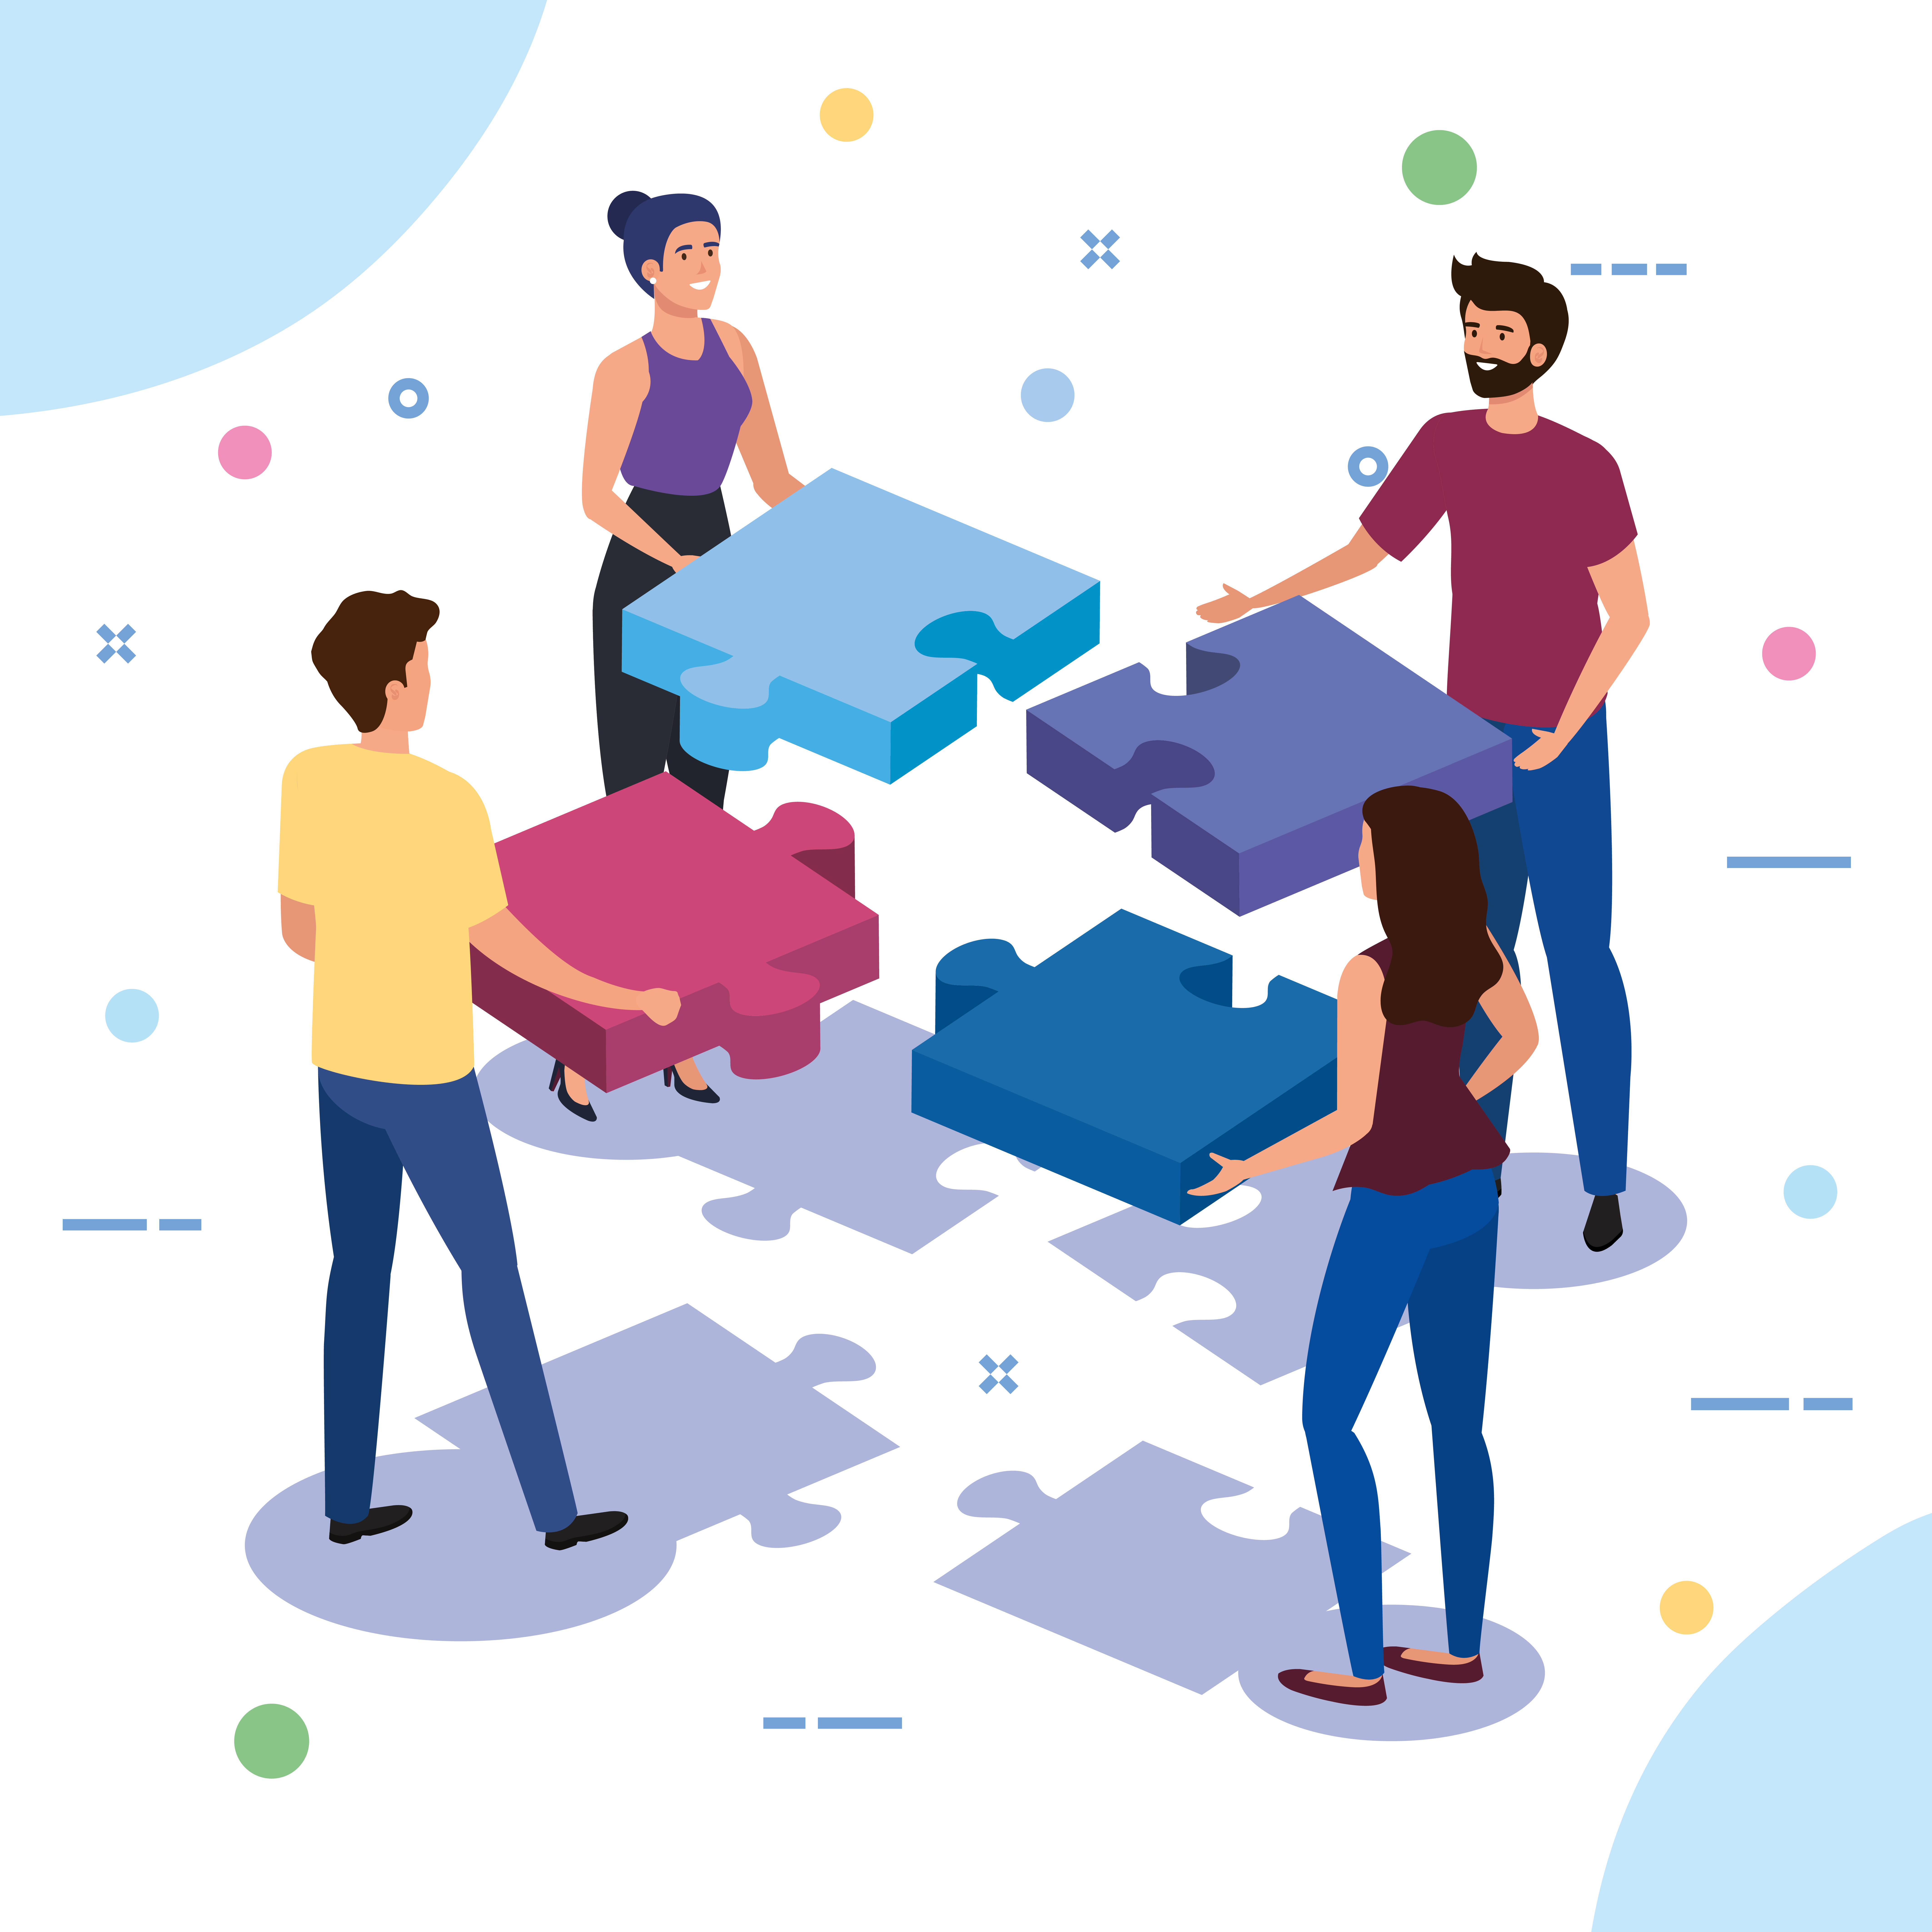 Animated photo of a group of people putting puzzle pieces together